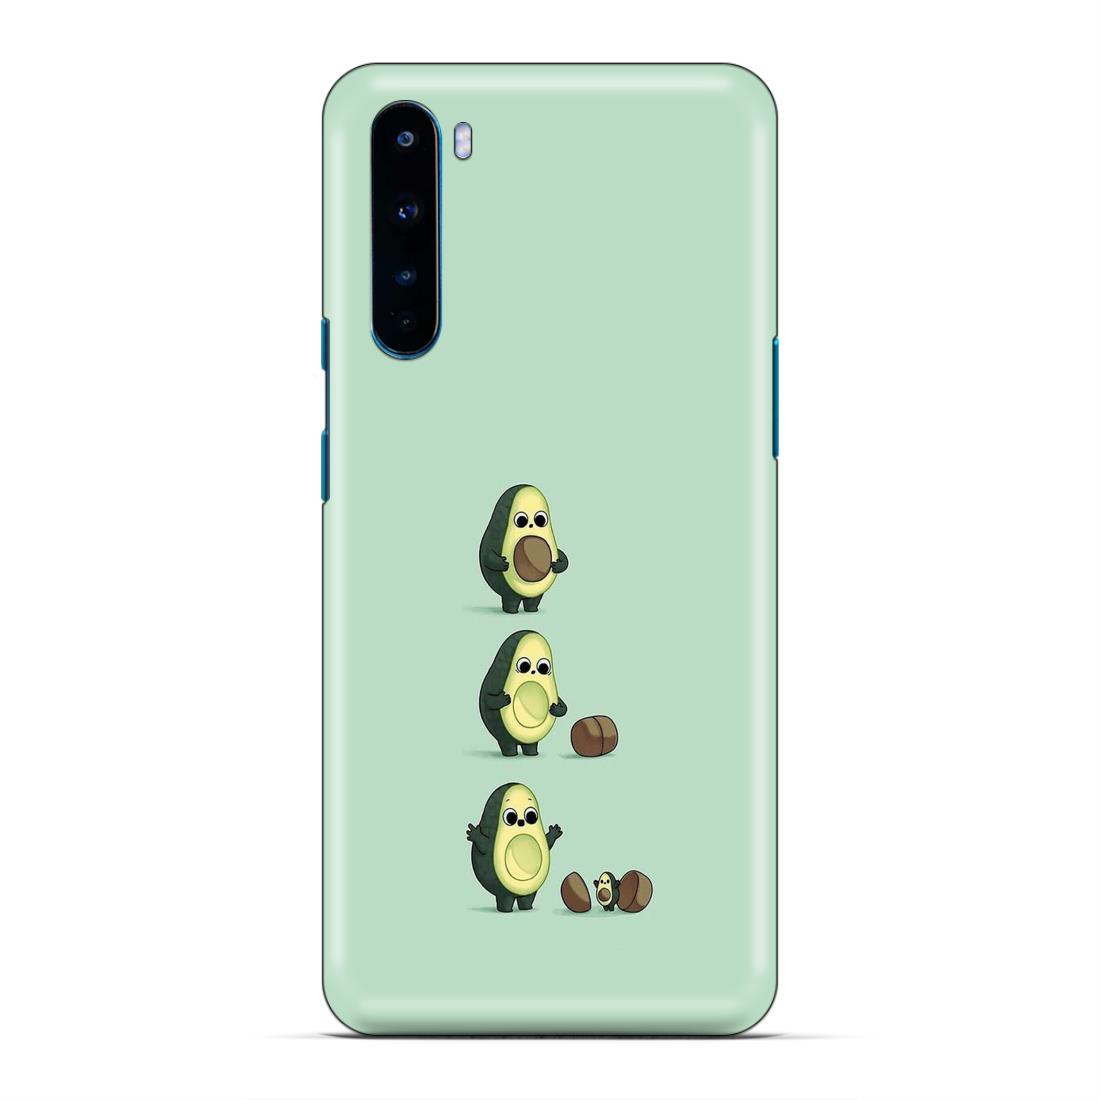 Cute Avocado Oneplus Nord Mobile Phone Cover Stayclassy In